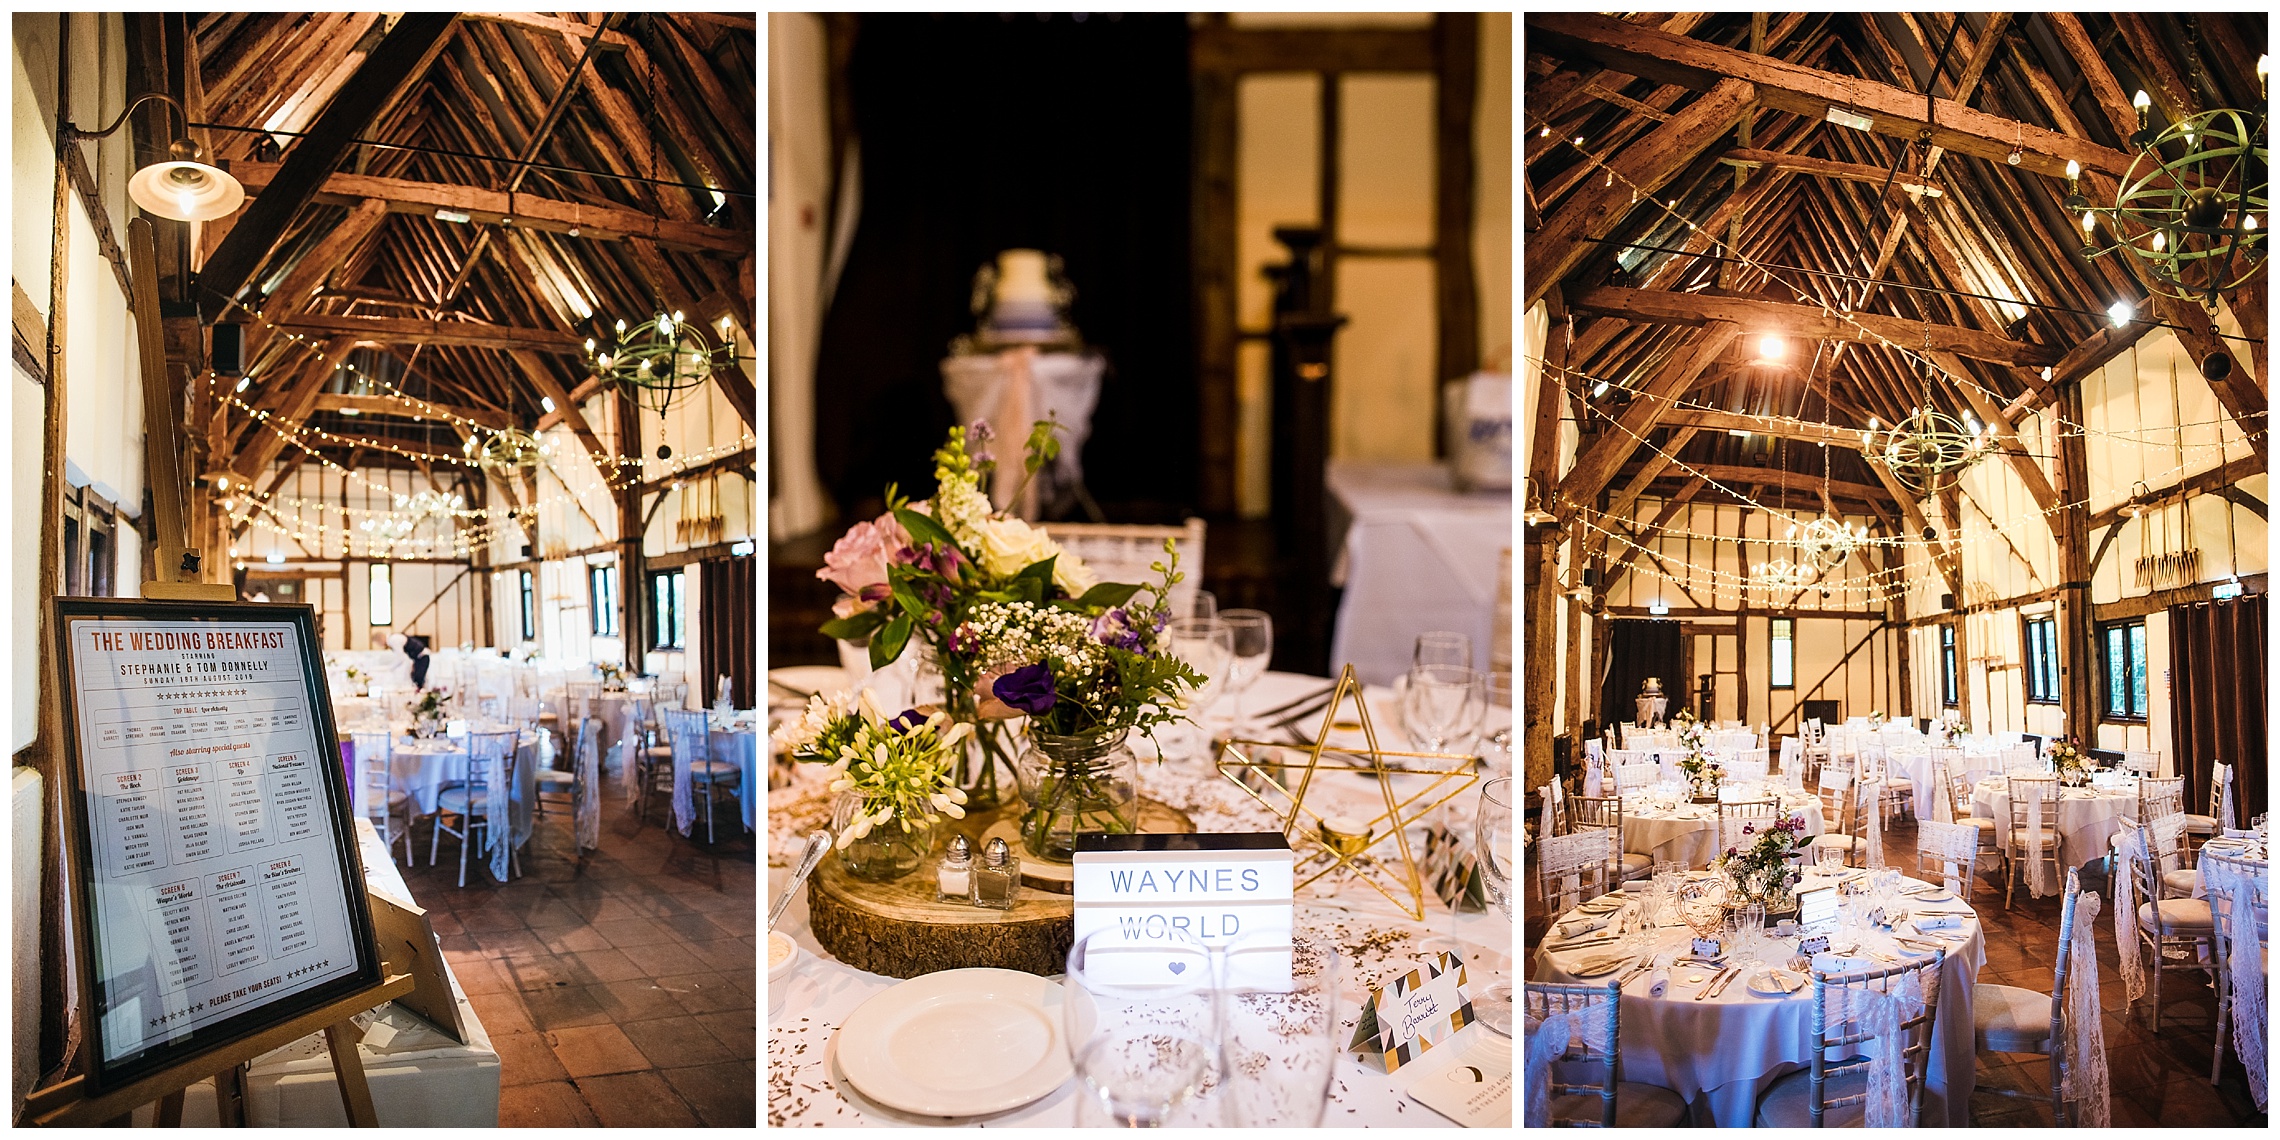 film style with copper wedding details in barn venue